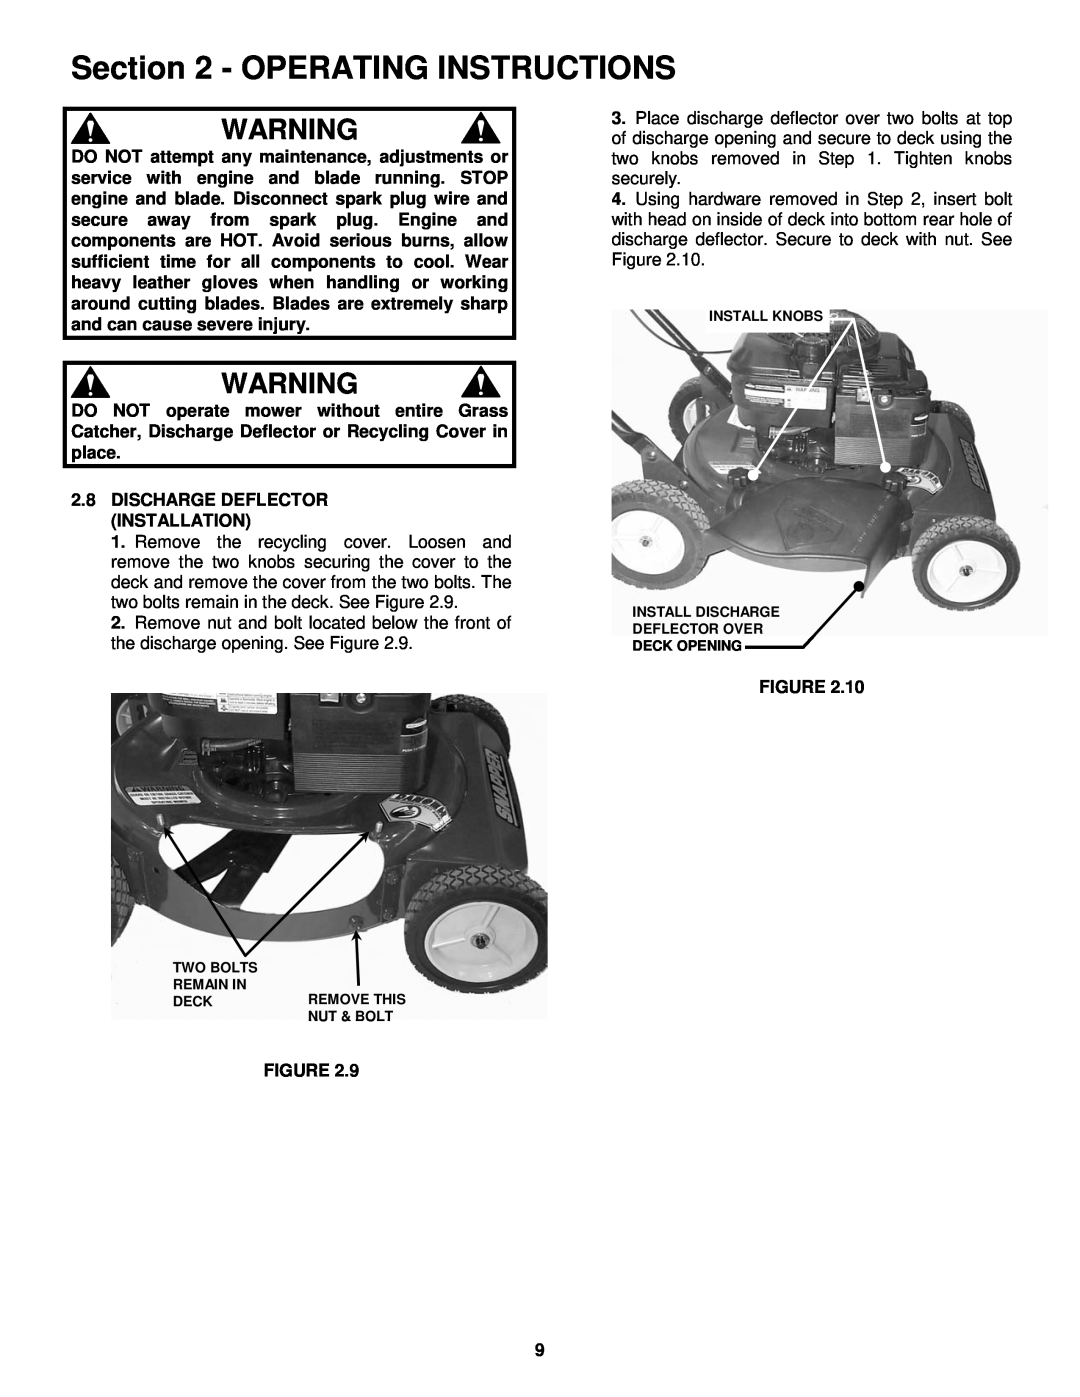 Snapper R195517B important safety instructions Operating Instructions, 2.8DISCHARGE DEFLECTOR INSTALLATION 